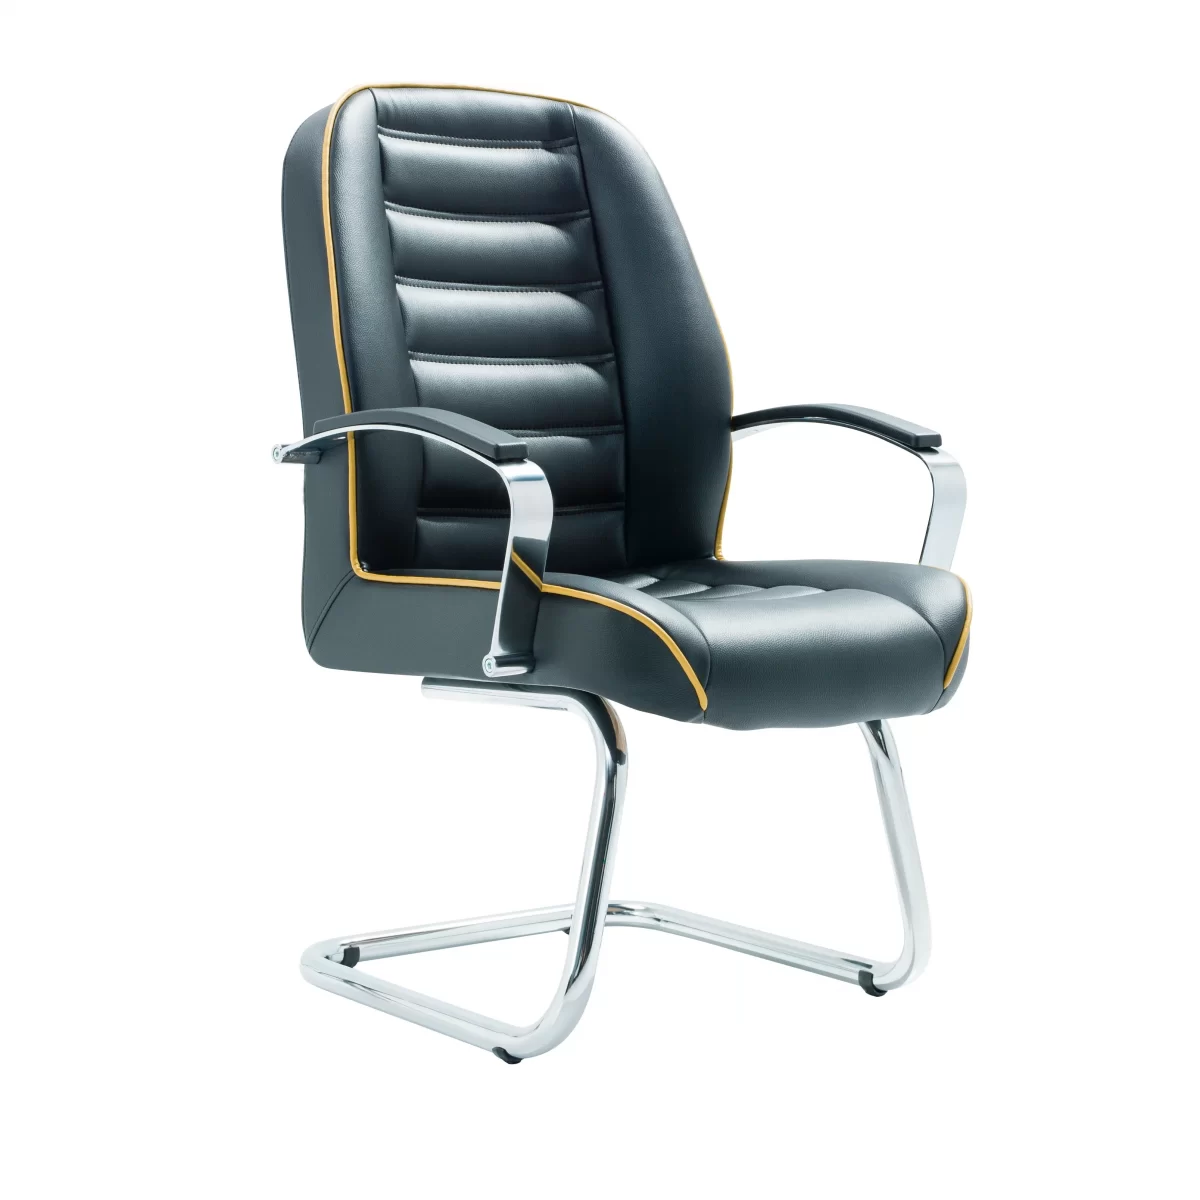 Karina Office Waiting Chair Modern Office Chairs Turkey 2 scaled